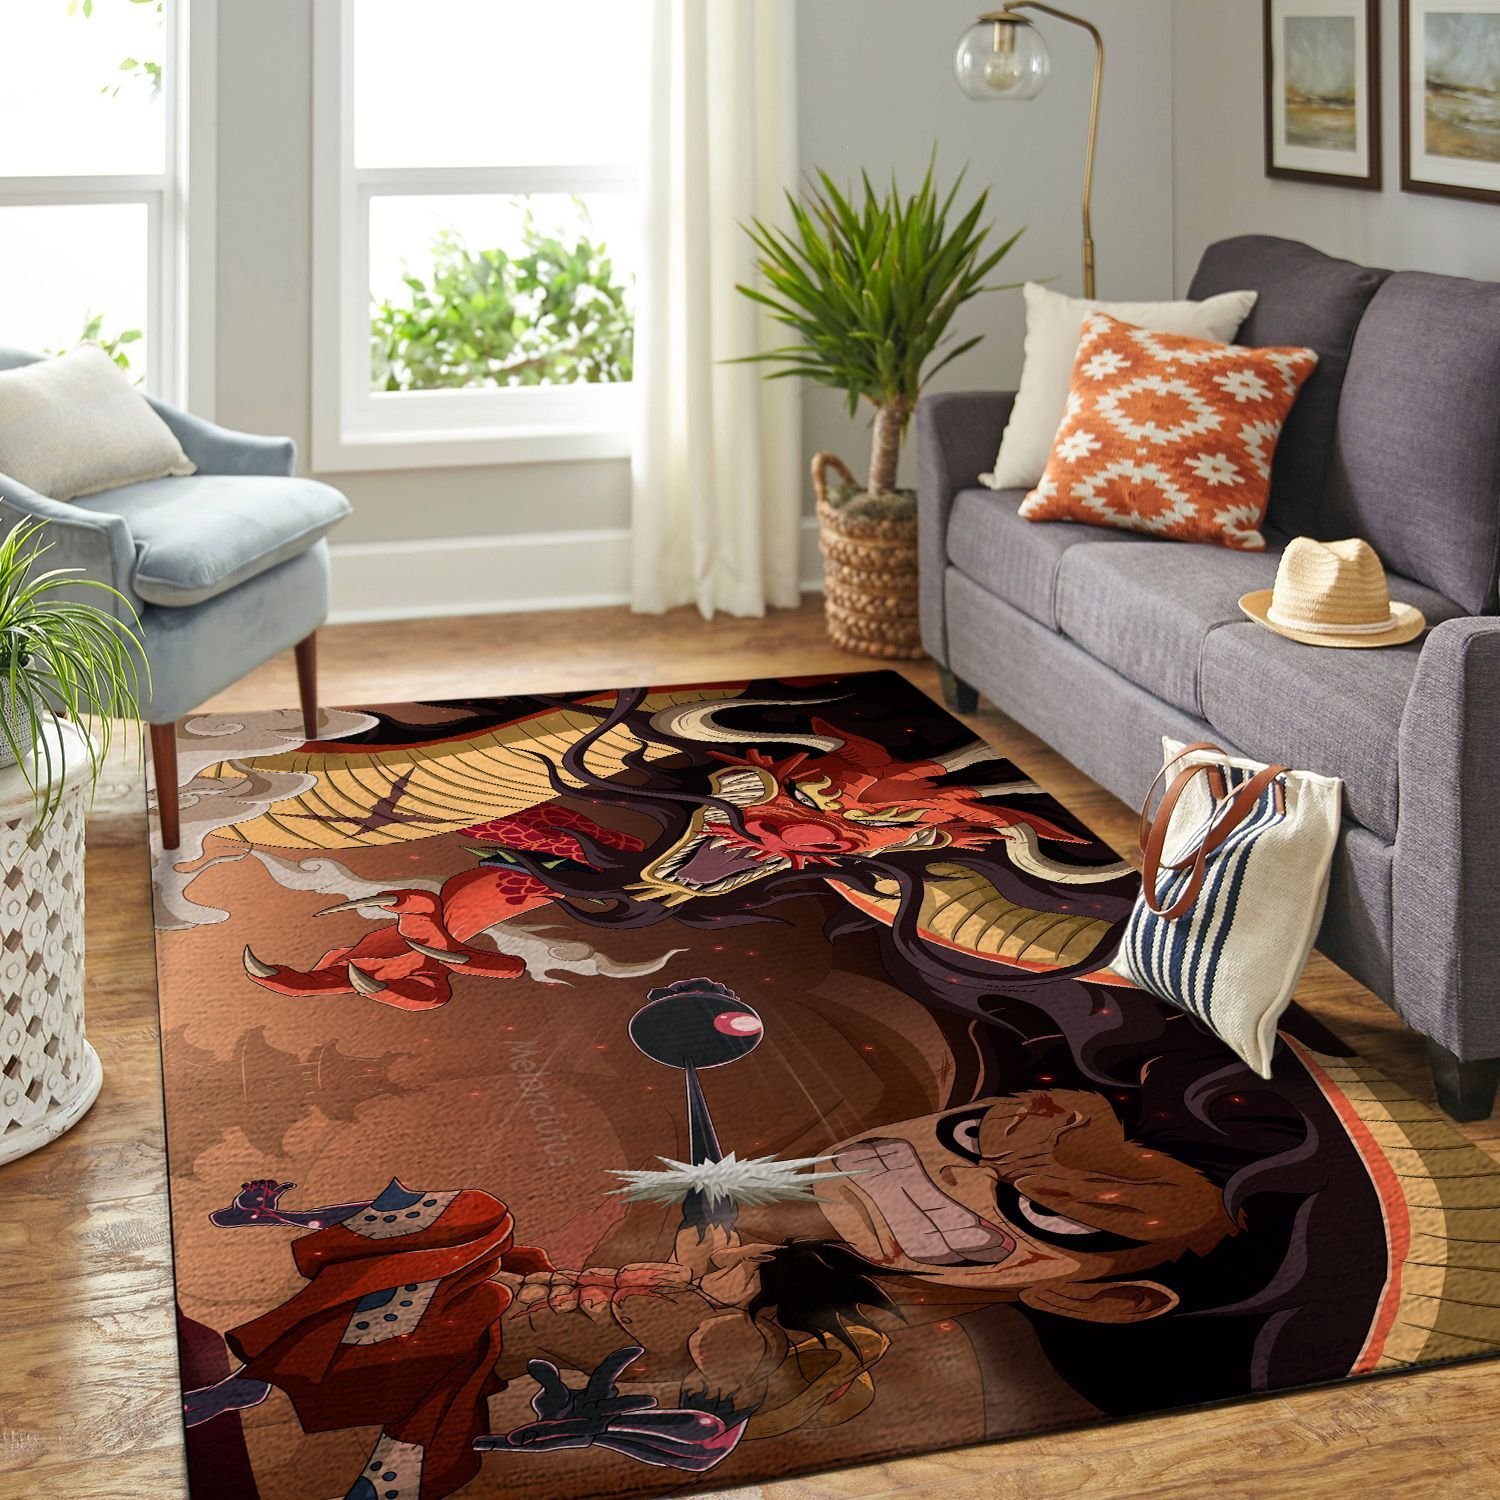 Amazon Onepiece-luffy Living Room Area No6428 Rug